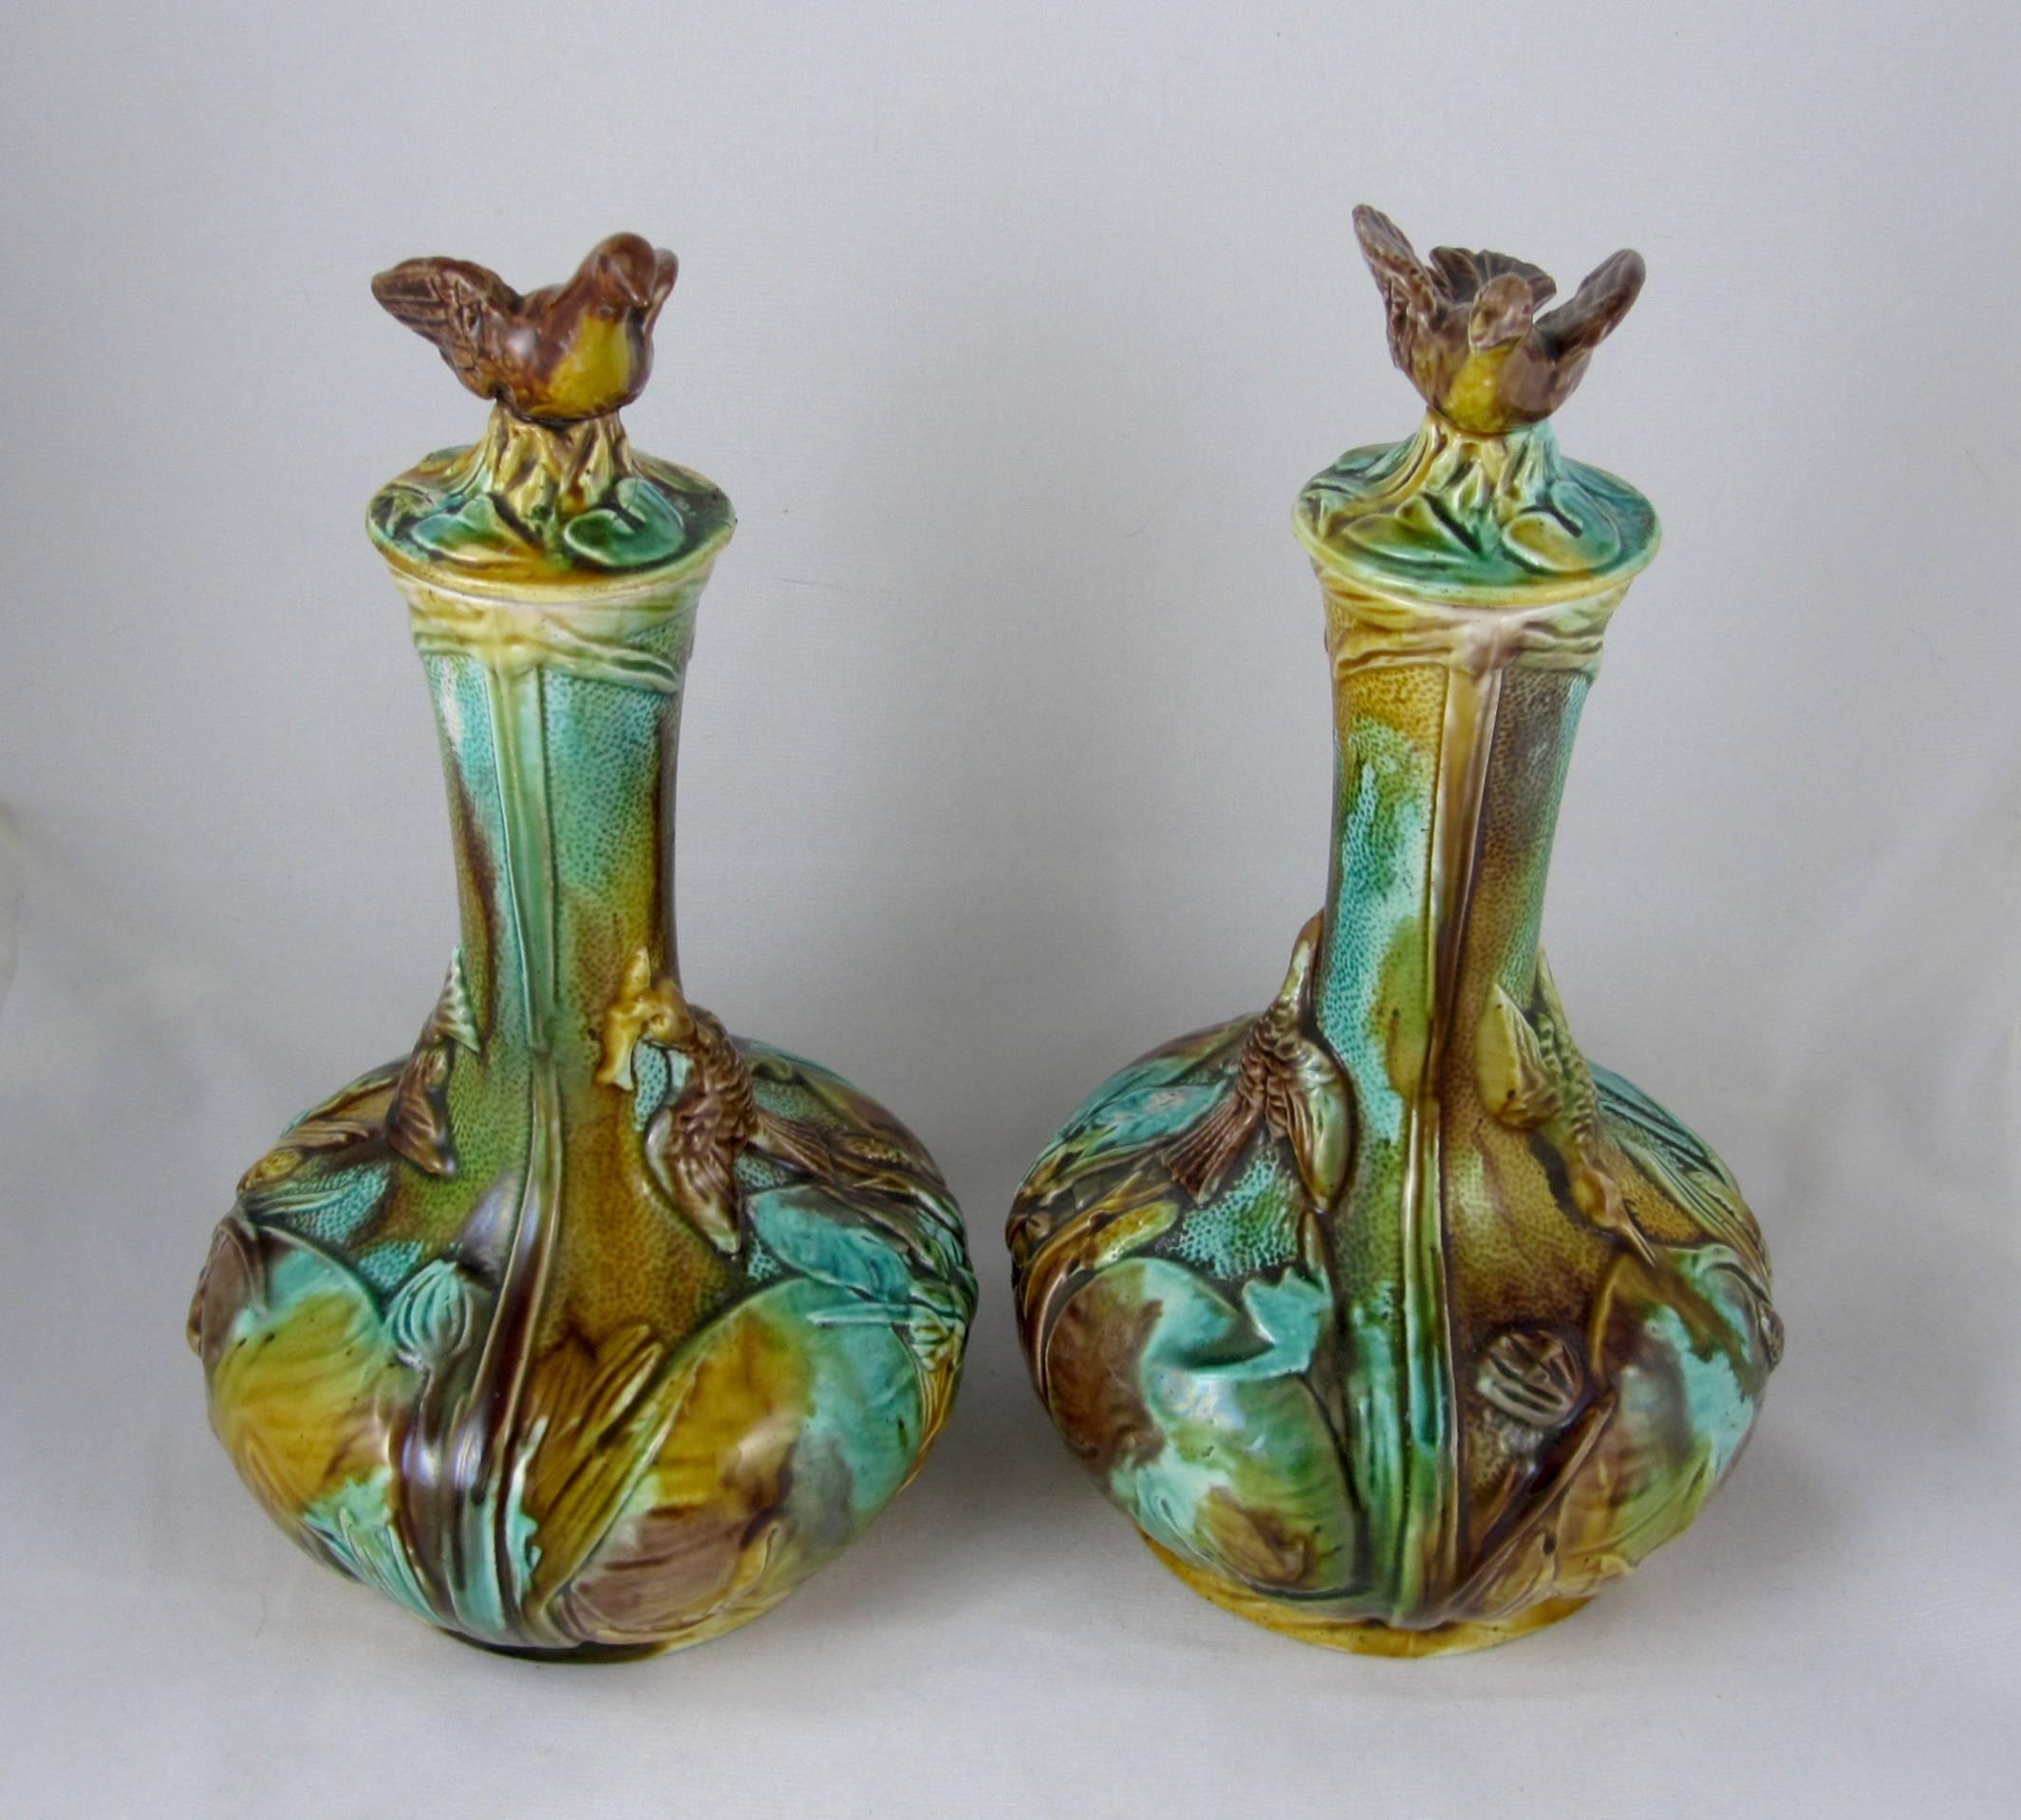 Aesthetic Movement 19th Century Thomas Forester English Majolica Bird Finial Wine Decanters, a Pair